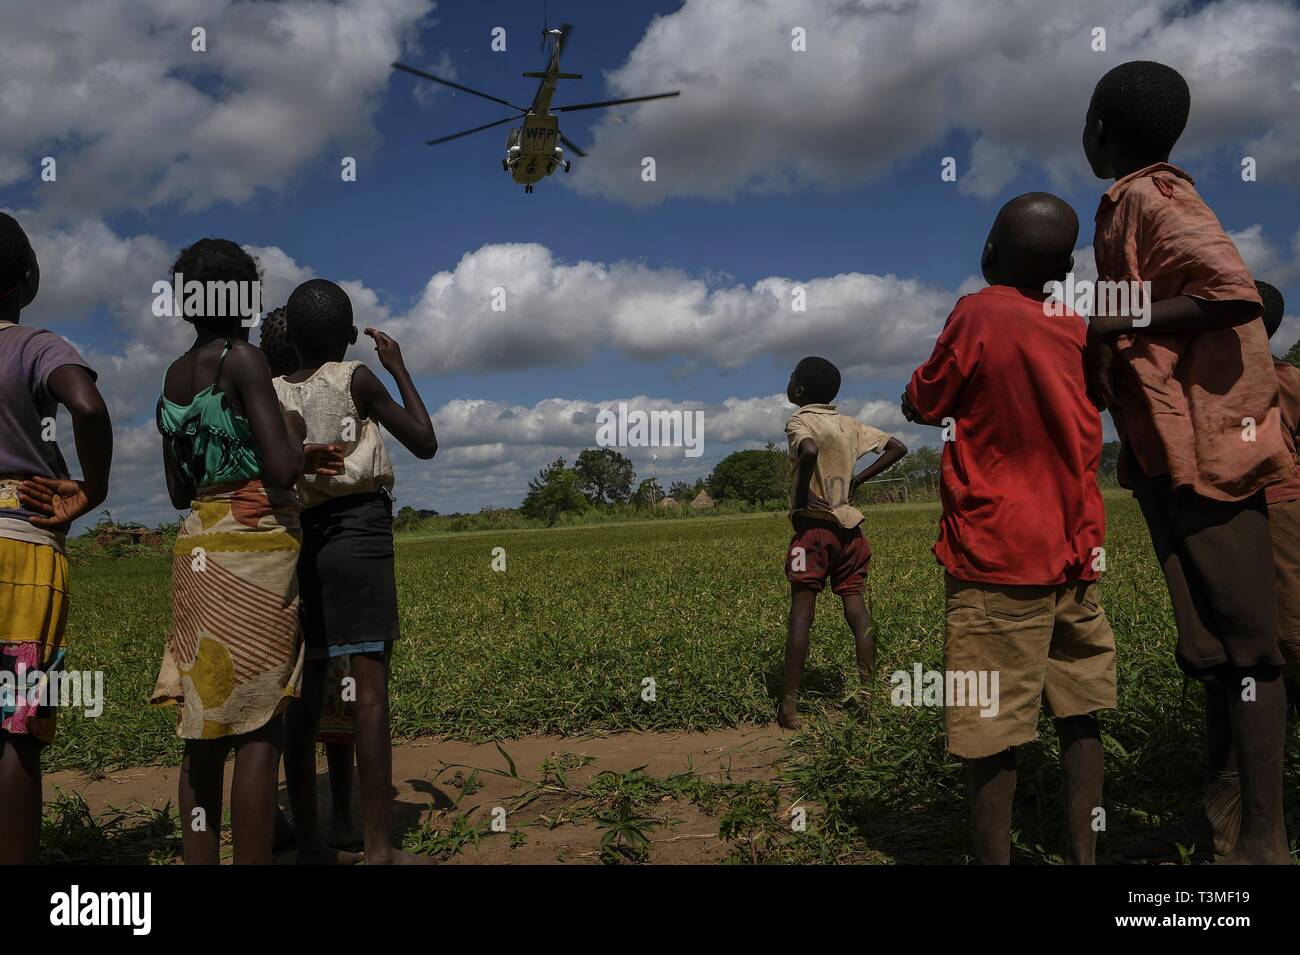 Mozambican children watch a U.S. Air Force helicopter take off after delivering food aid in the aftermath of the massive Cyclone Idai April 8, 2019 in Bebedo, Mozambique. The World Food Programme, with help from the U.S. Air Force is transporting emergency relief supplies to assist the devastated region. Stock Photo